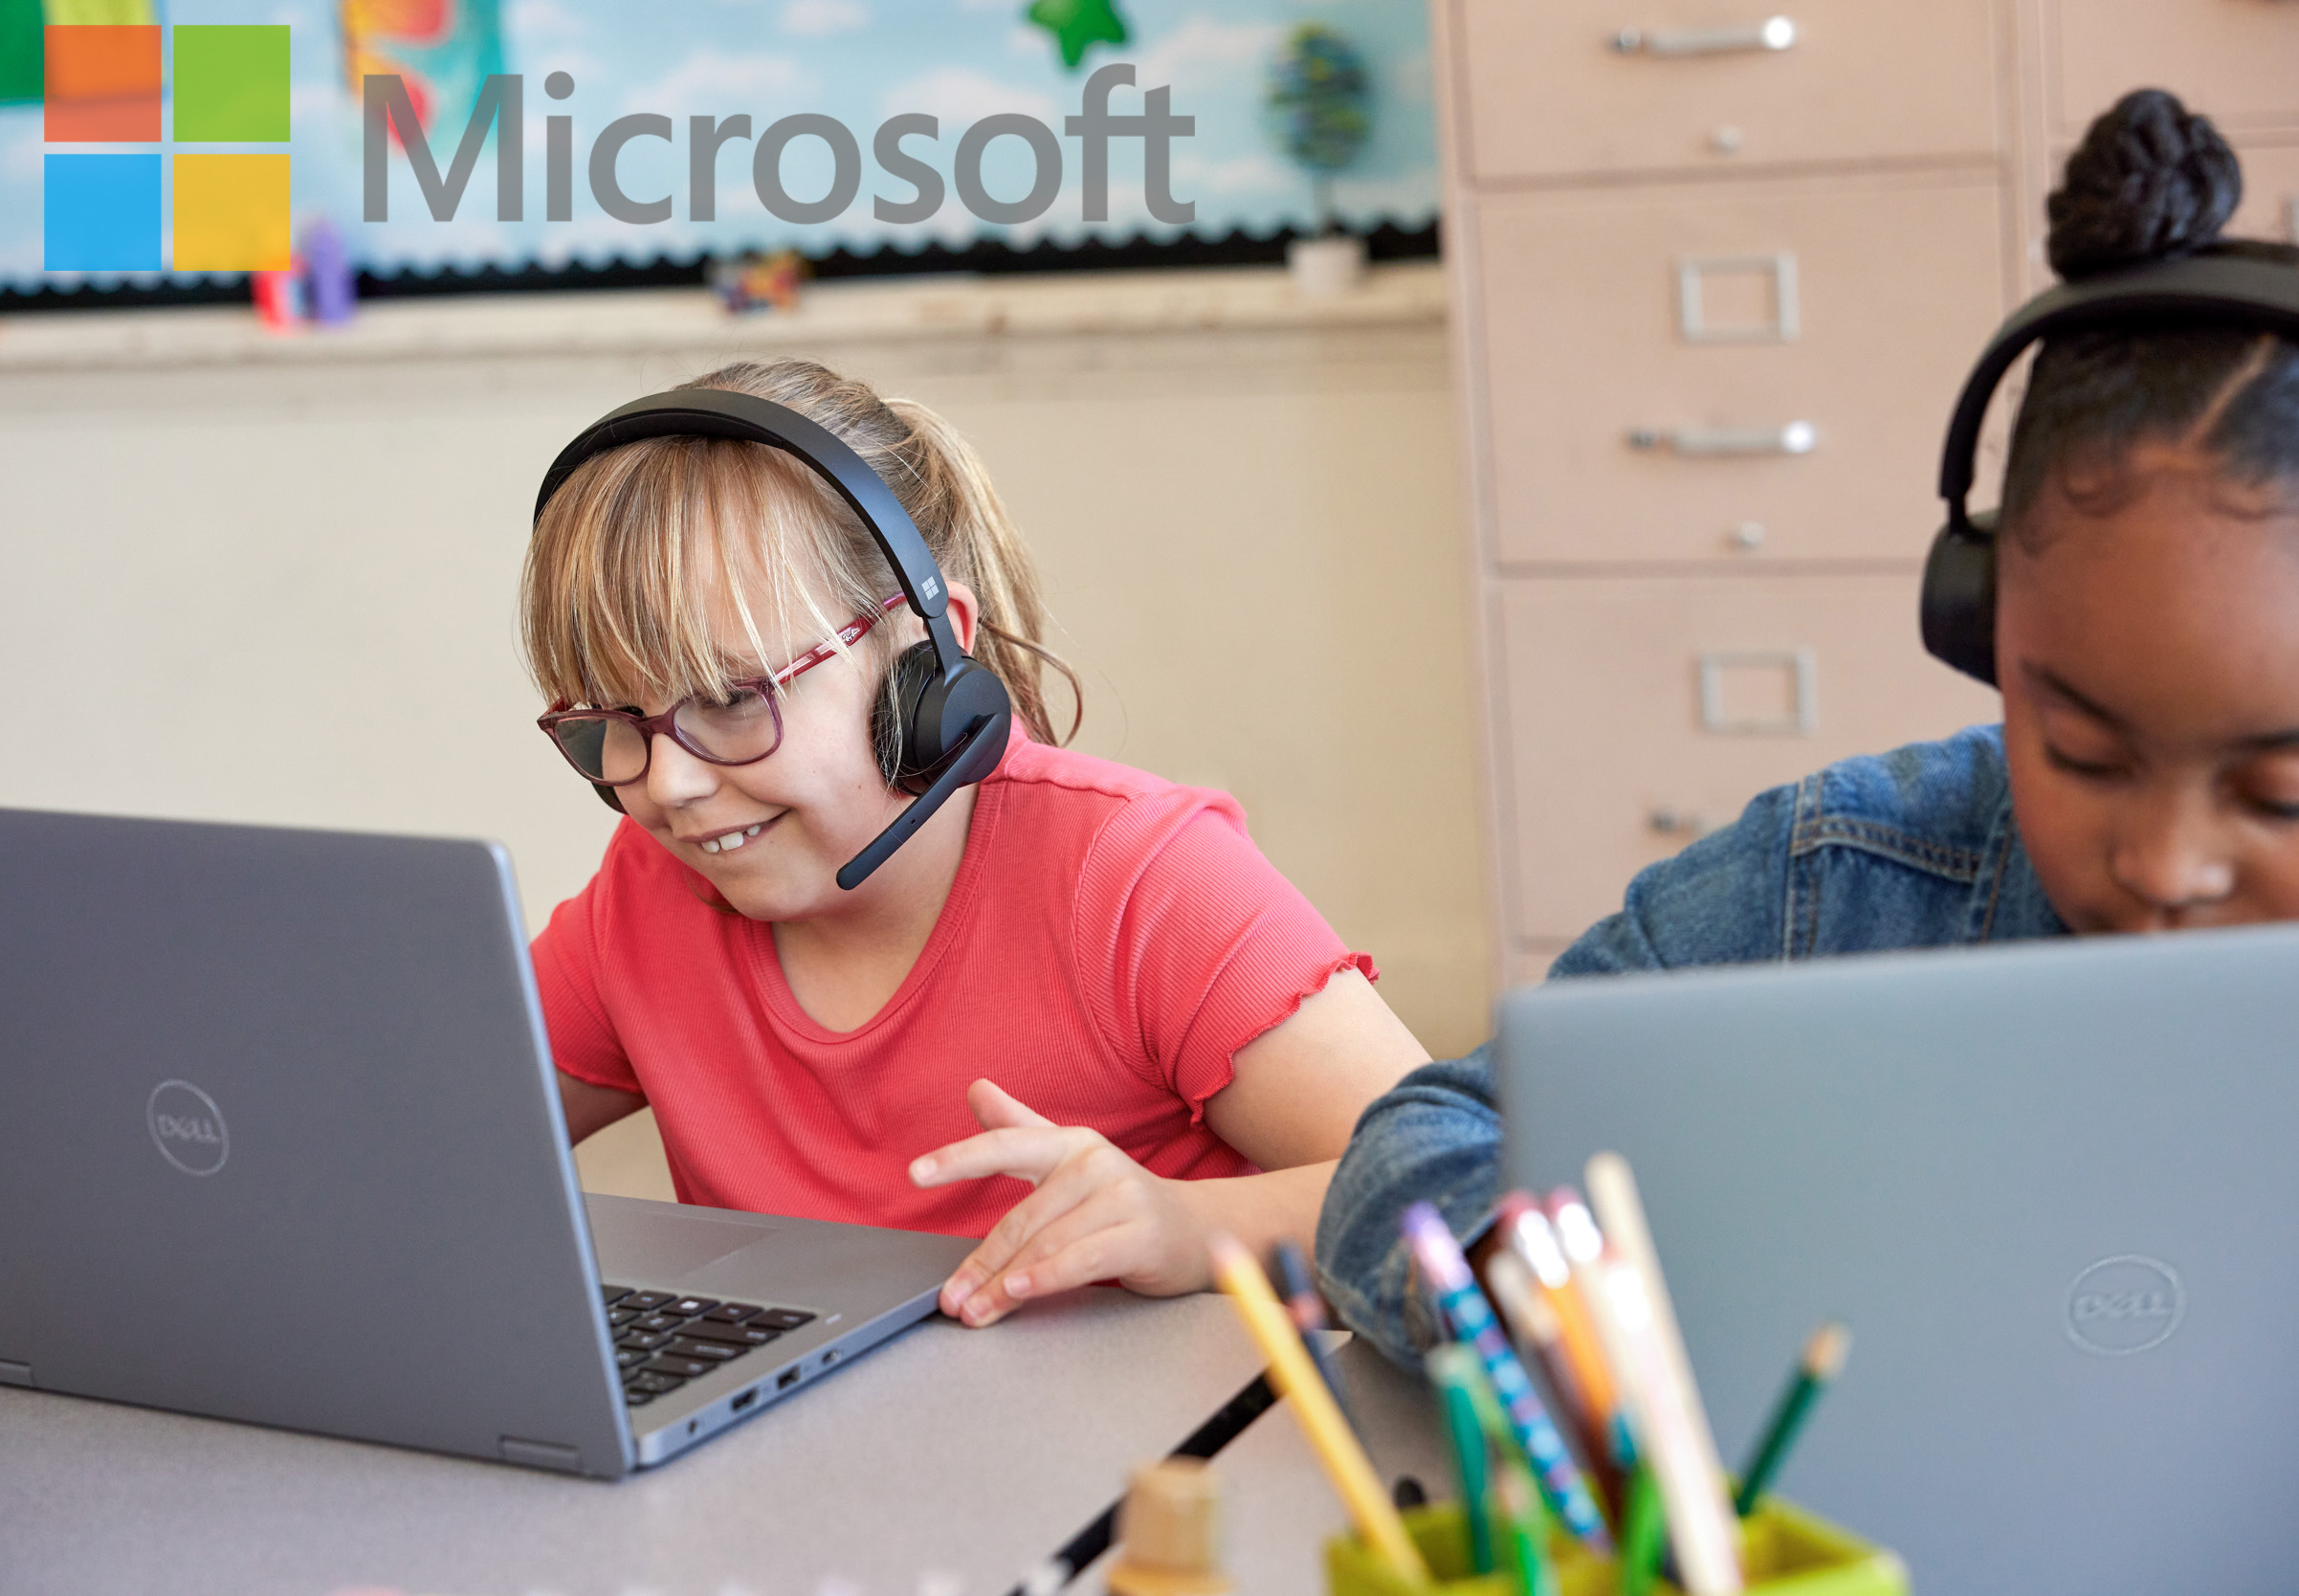  An elementary school student learns new skills while working with educational software in a Microsoft Ad Campaign photographed by Lifestyle Photographer Diana Mulvihill